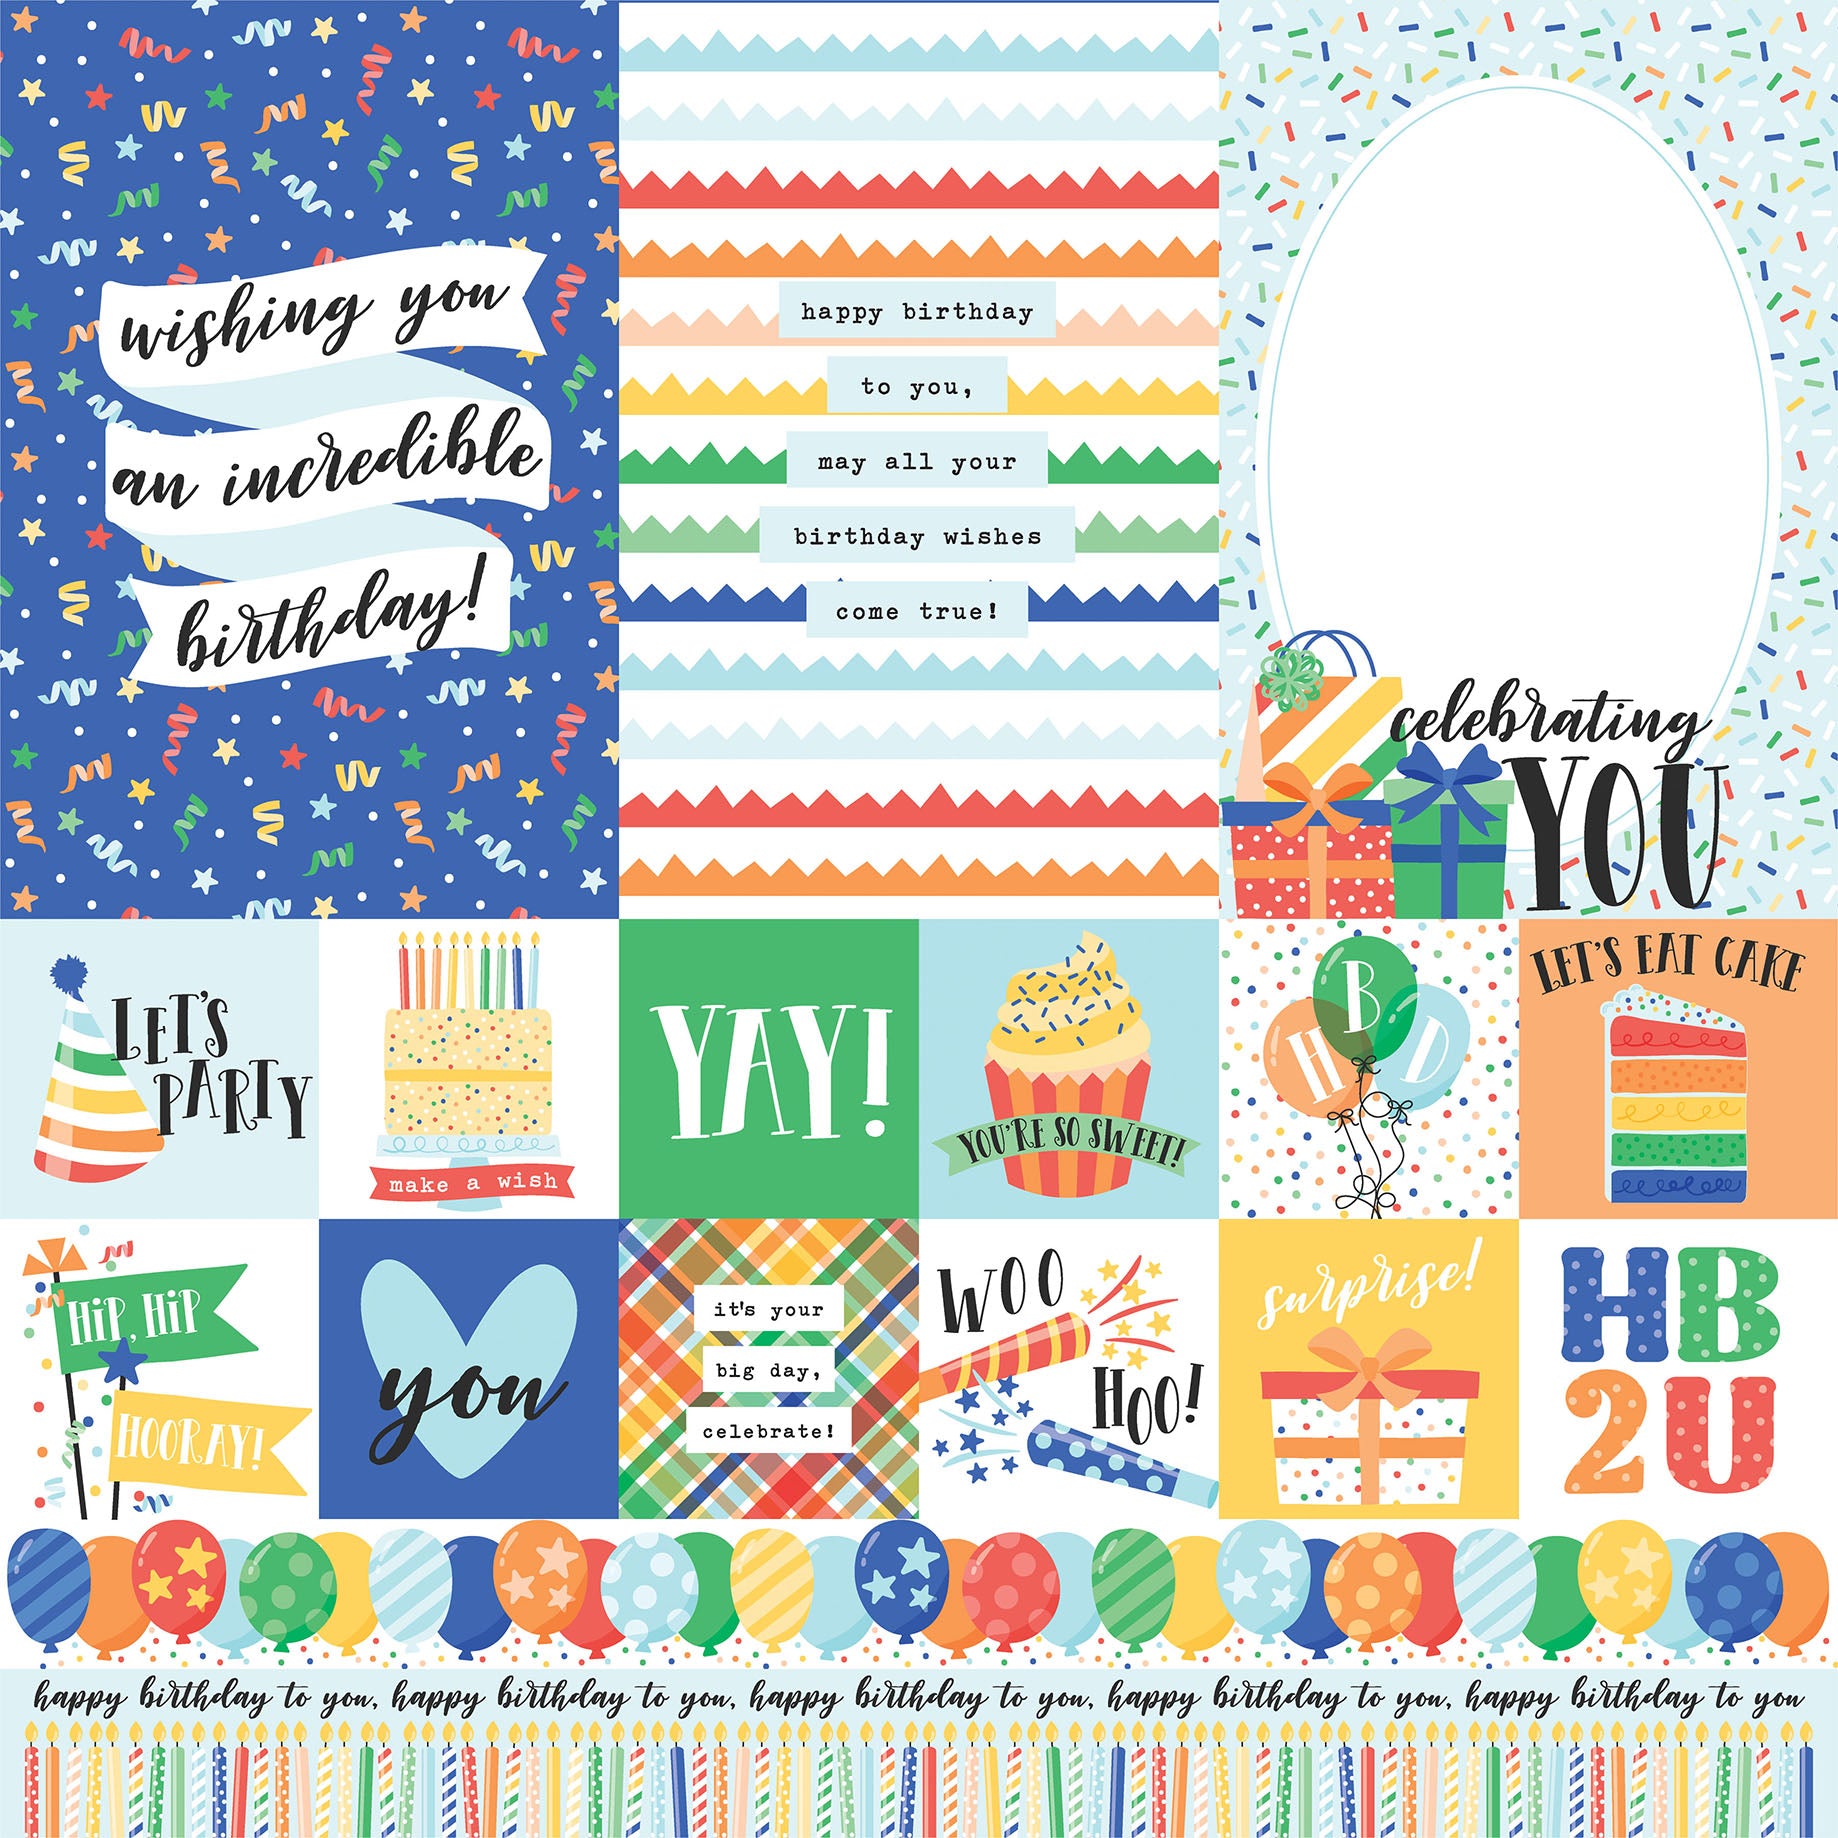 Make a Wish Birthday Boy Collection Multi Journaling Cards 12 x 12 Double-Sided Scrapbook Paper by Echo Park Paper